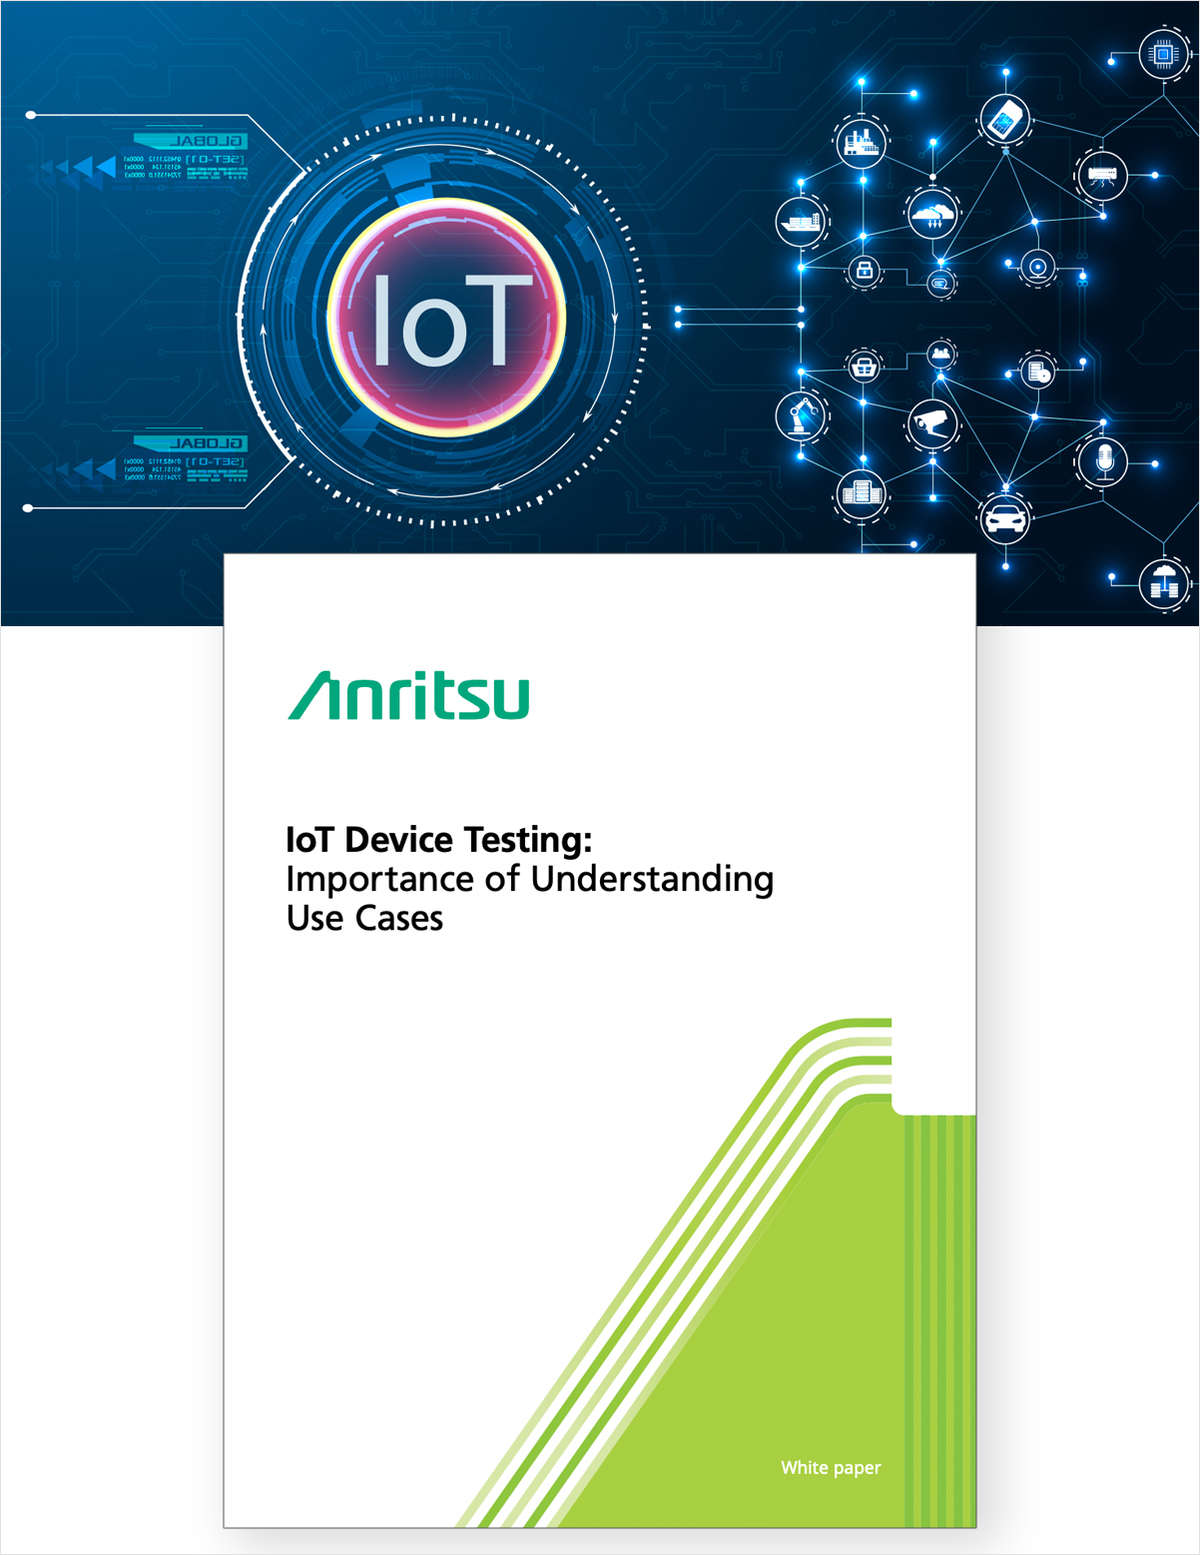 IoT Device Testing: Importance of Understanding Use Cases